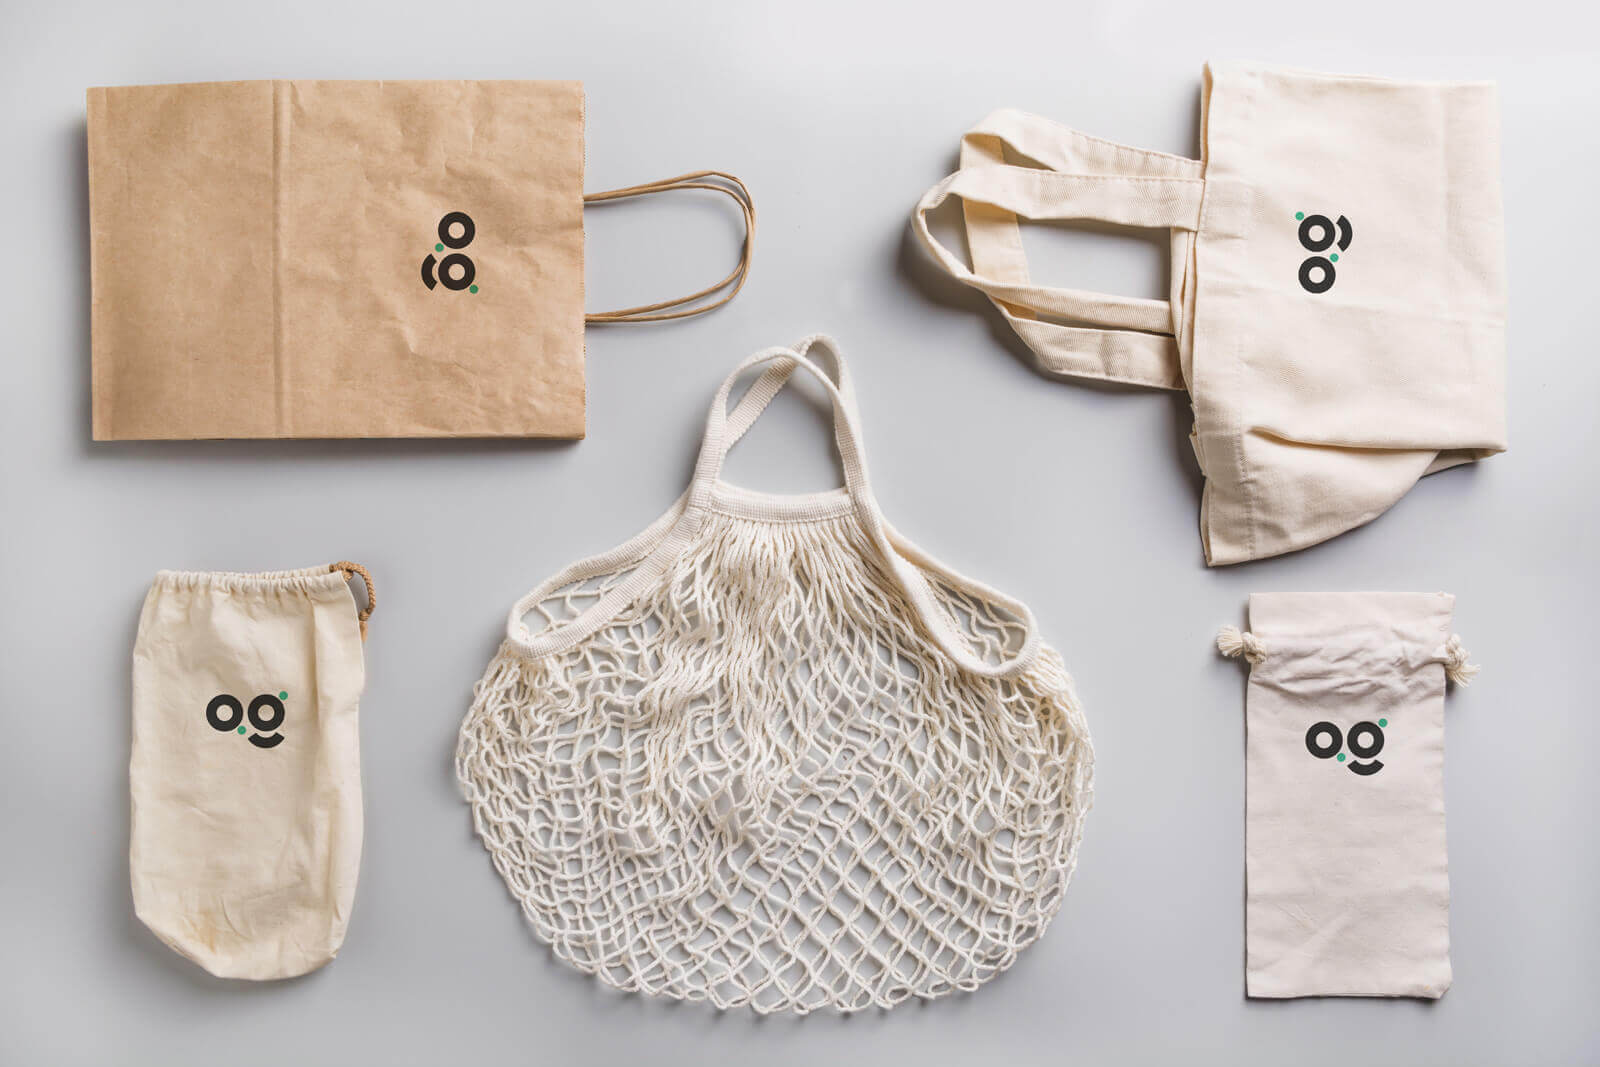 paper, cotton, mesh and jute bags showing eco friendly and zero waste packaging alternatives